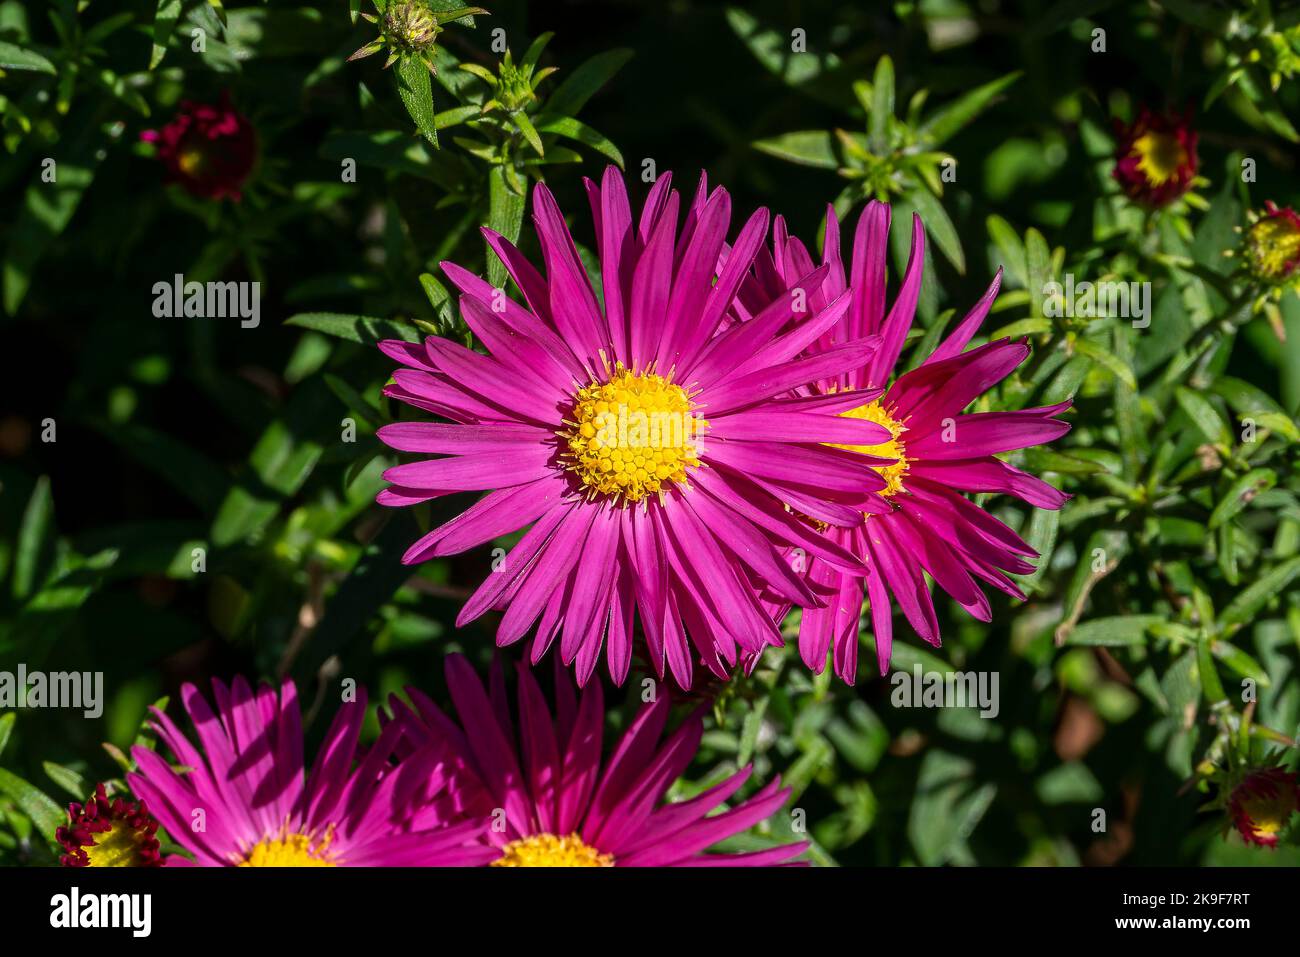 Aster novi belgii 'Bahamas' a magenta pink herbaceous summer autumn perennial flower plant commonly known as Michaelmas daisy stock photo image Stock Photo